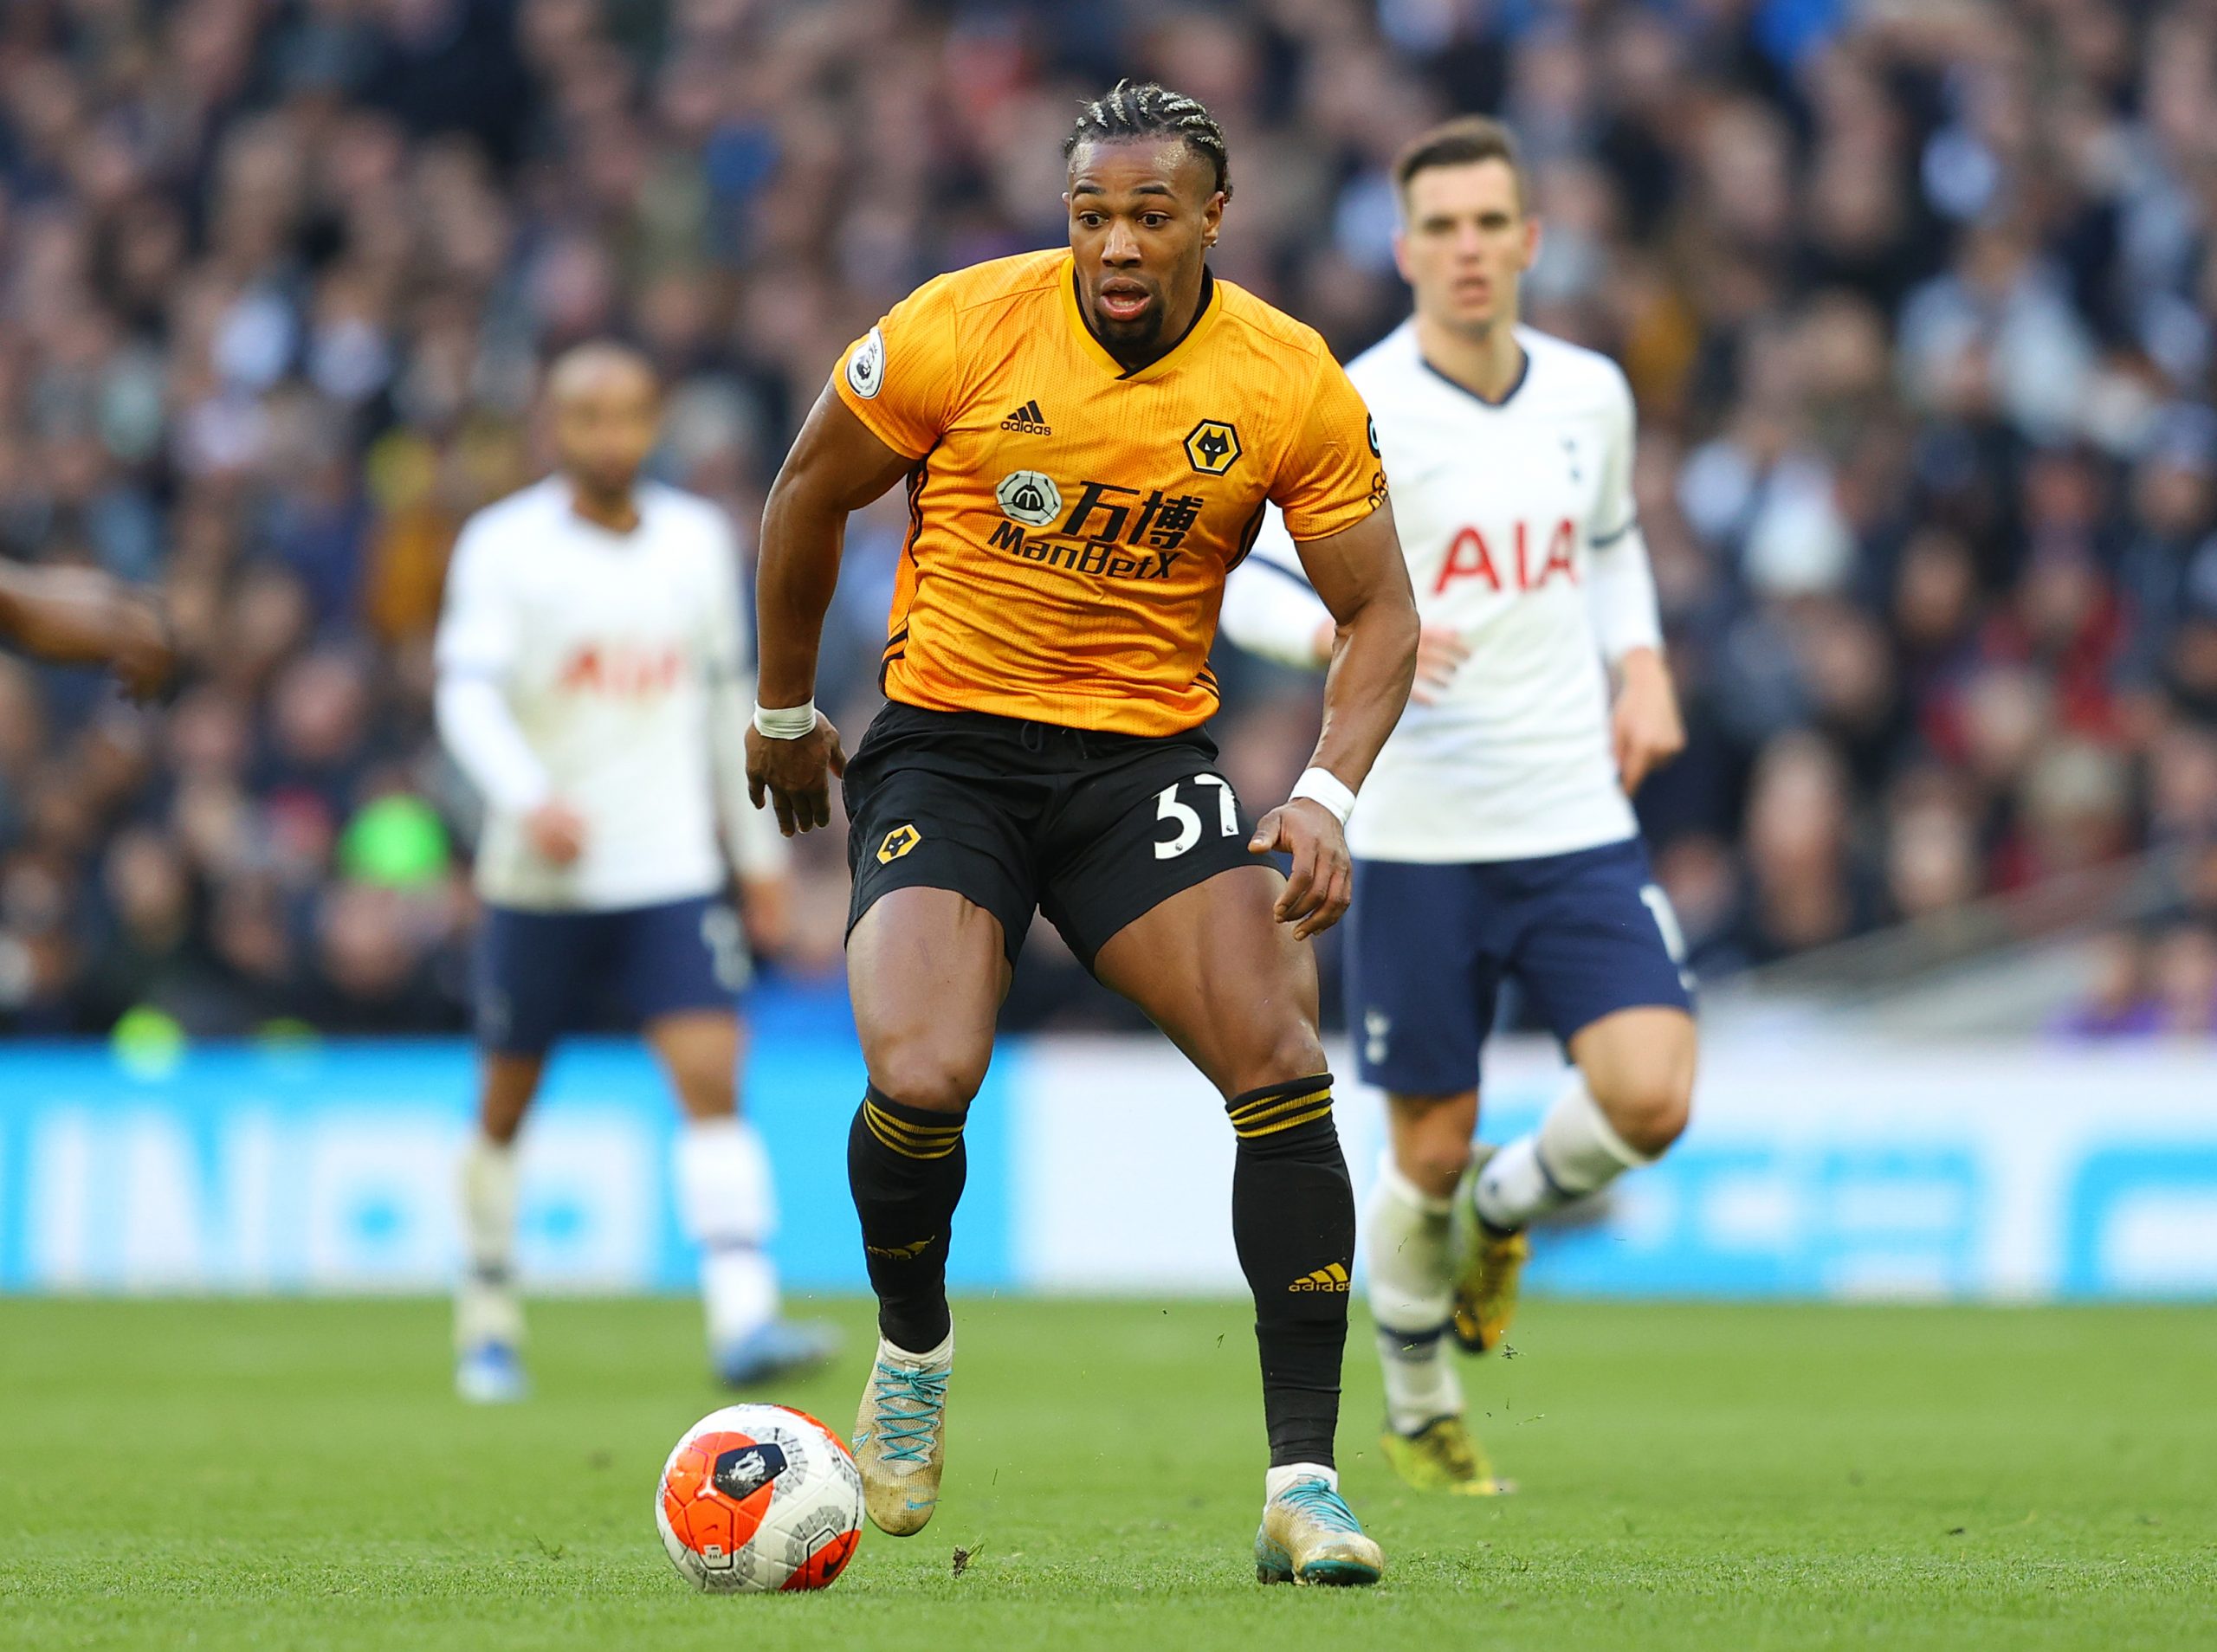 LONDON, ENGLAND - MARCH 01: Adama Traore of Wolverhampton Wanderers in action during the Premier League match between Tottenham Hotspur and Wolverhampton Wanderers at Tottenham Hotspur Stadium on March 01, 2020 in London, United Kingdom. (Photo by Richard Heathcote/Getty Images)